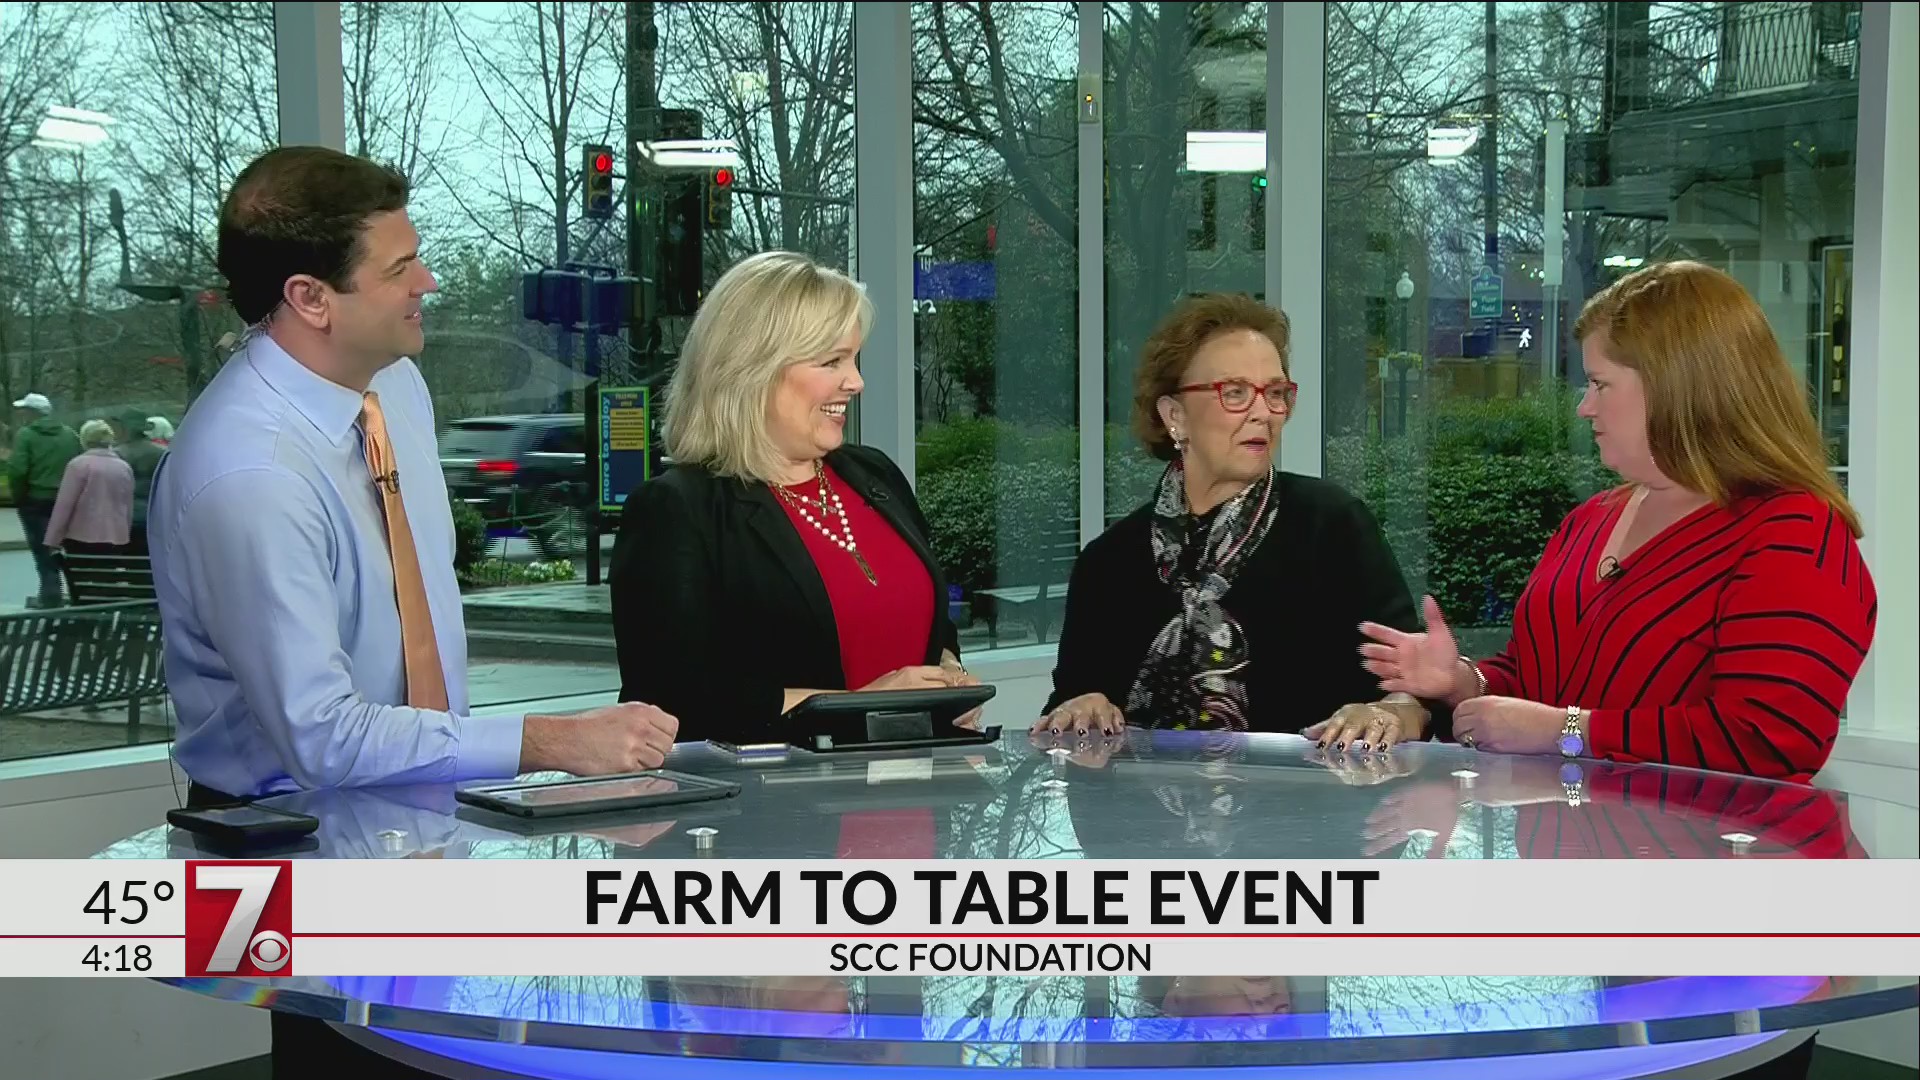 Thumbnail for the video titled "#7Event: Spartanburg Community College's Farm to Table event"